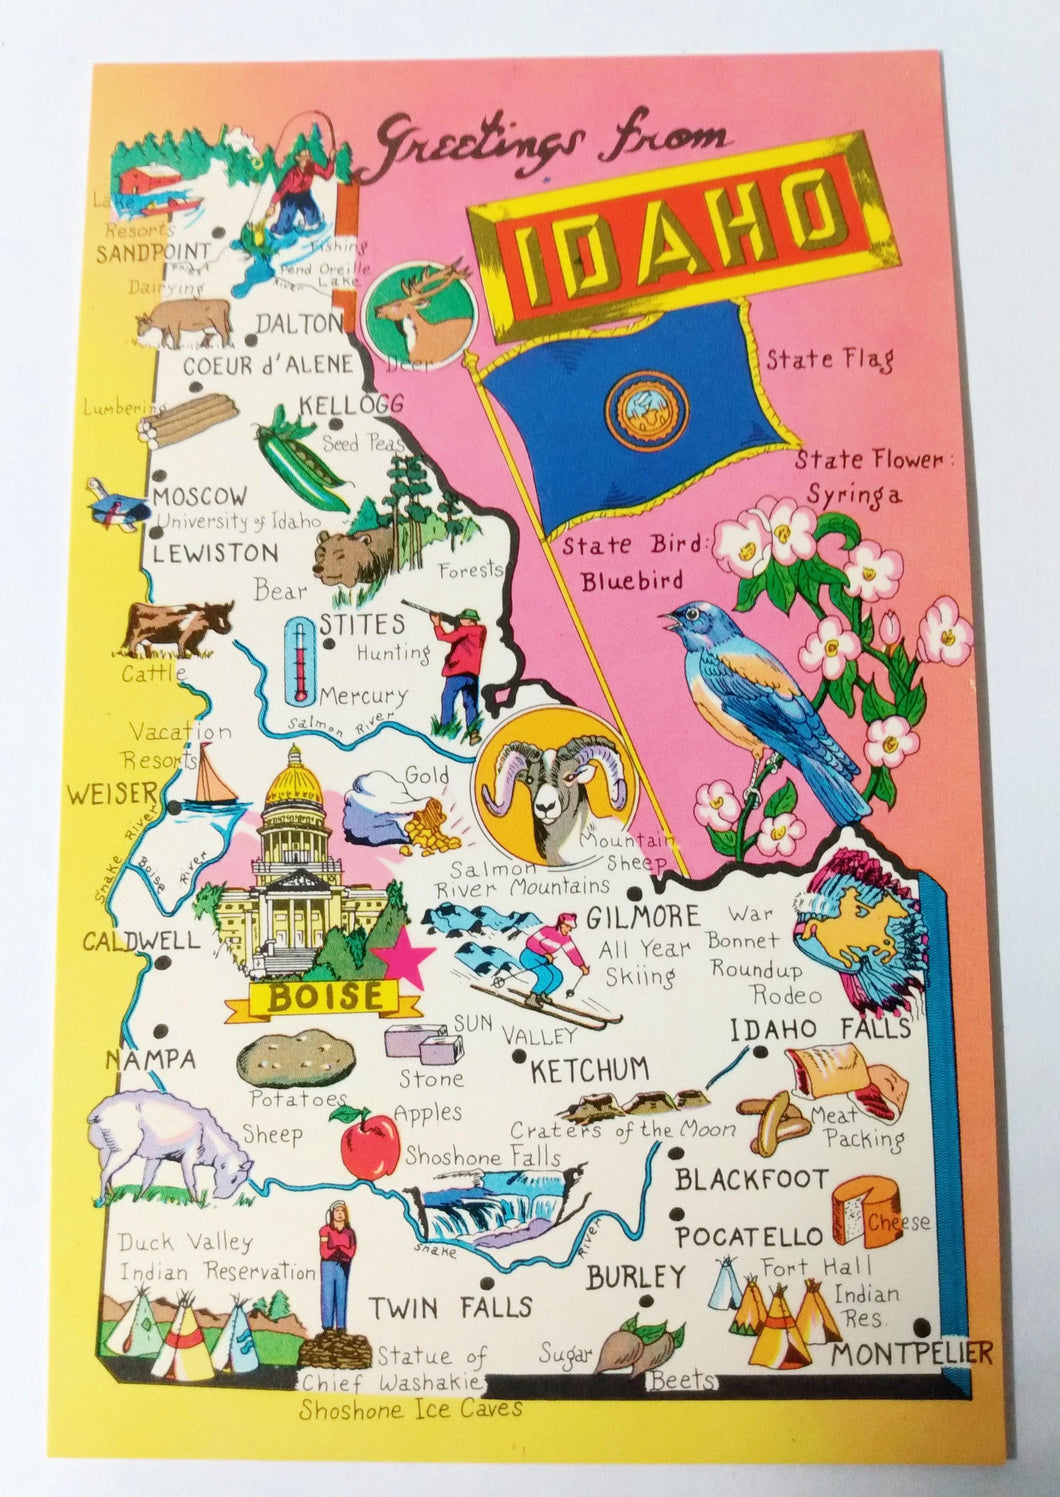 Greetings From Idaho 1960s Tourist Attractions Map Postcard - TulipStuff